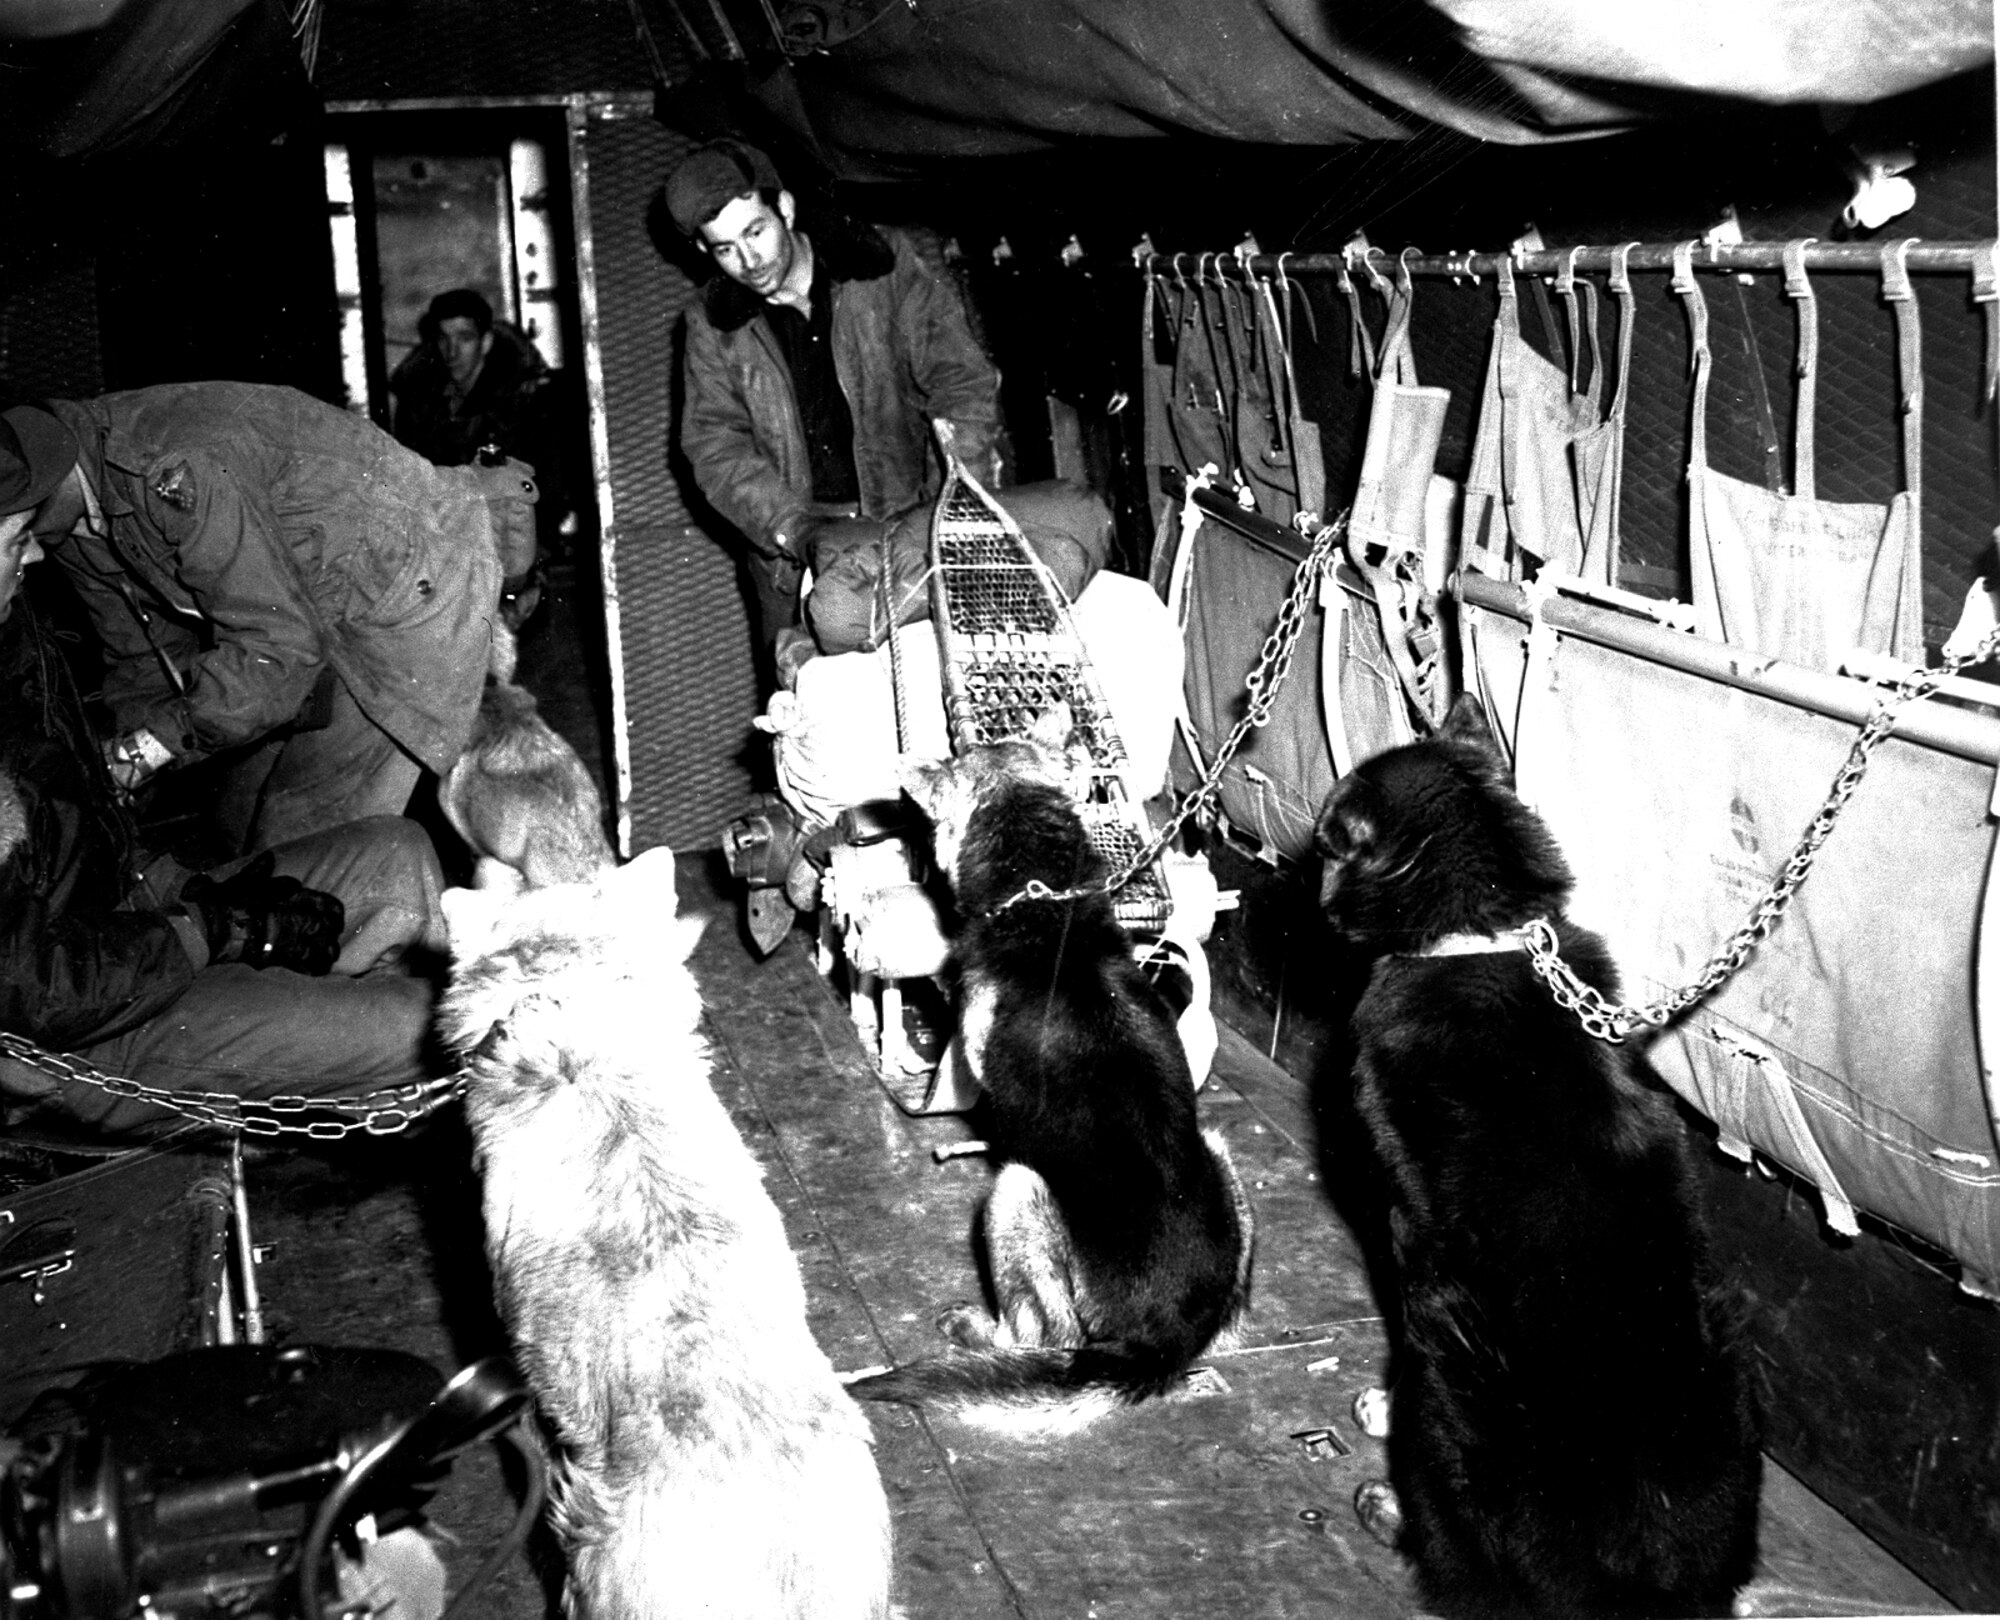 A team of military working dogs sits inside an aircraft circa 1950. (Photo courtesy of Alaska Veterans Museum, archives)